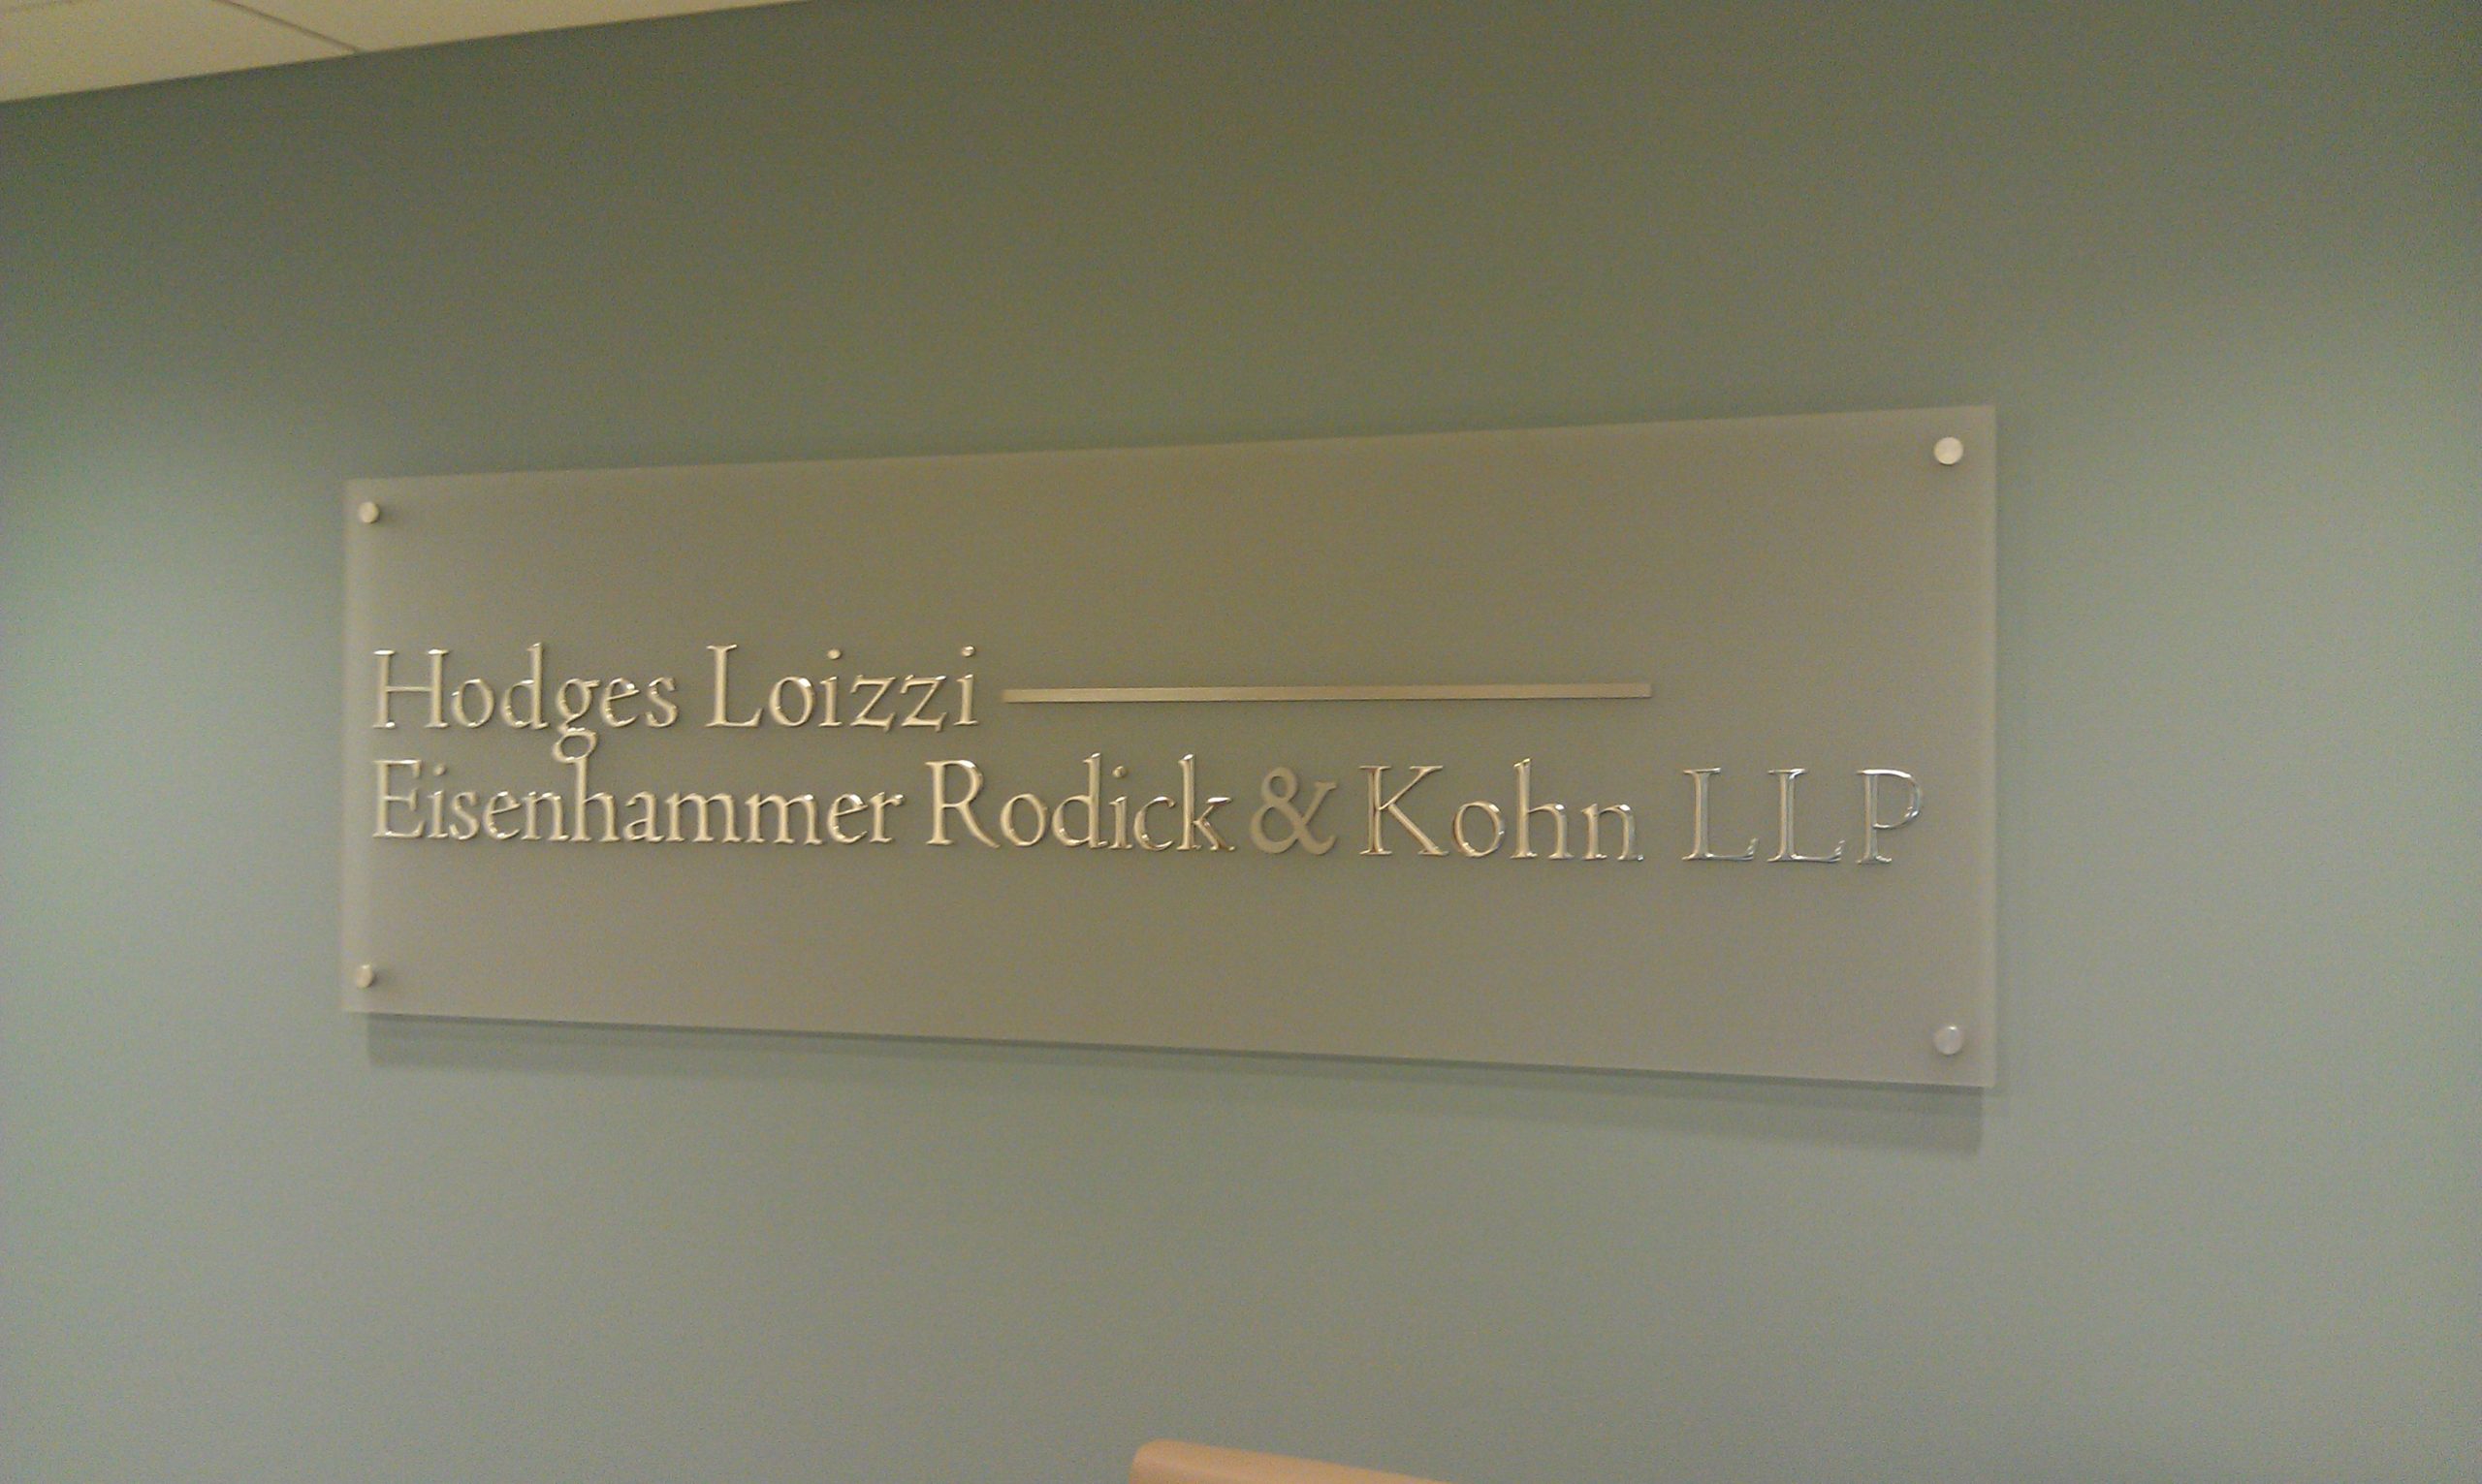 Acrylic Panel Lobby Signs in Oak Brook IL